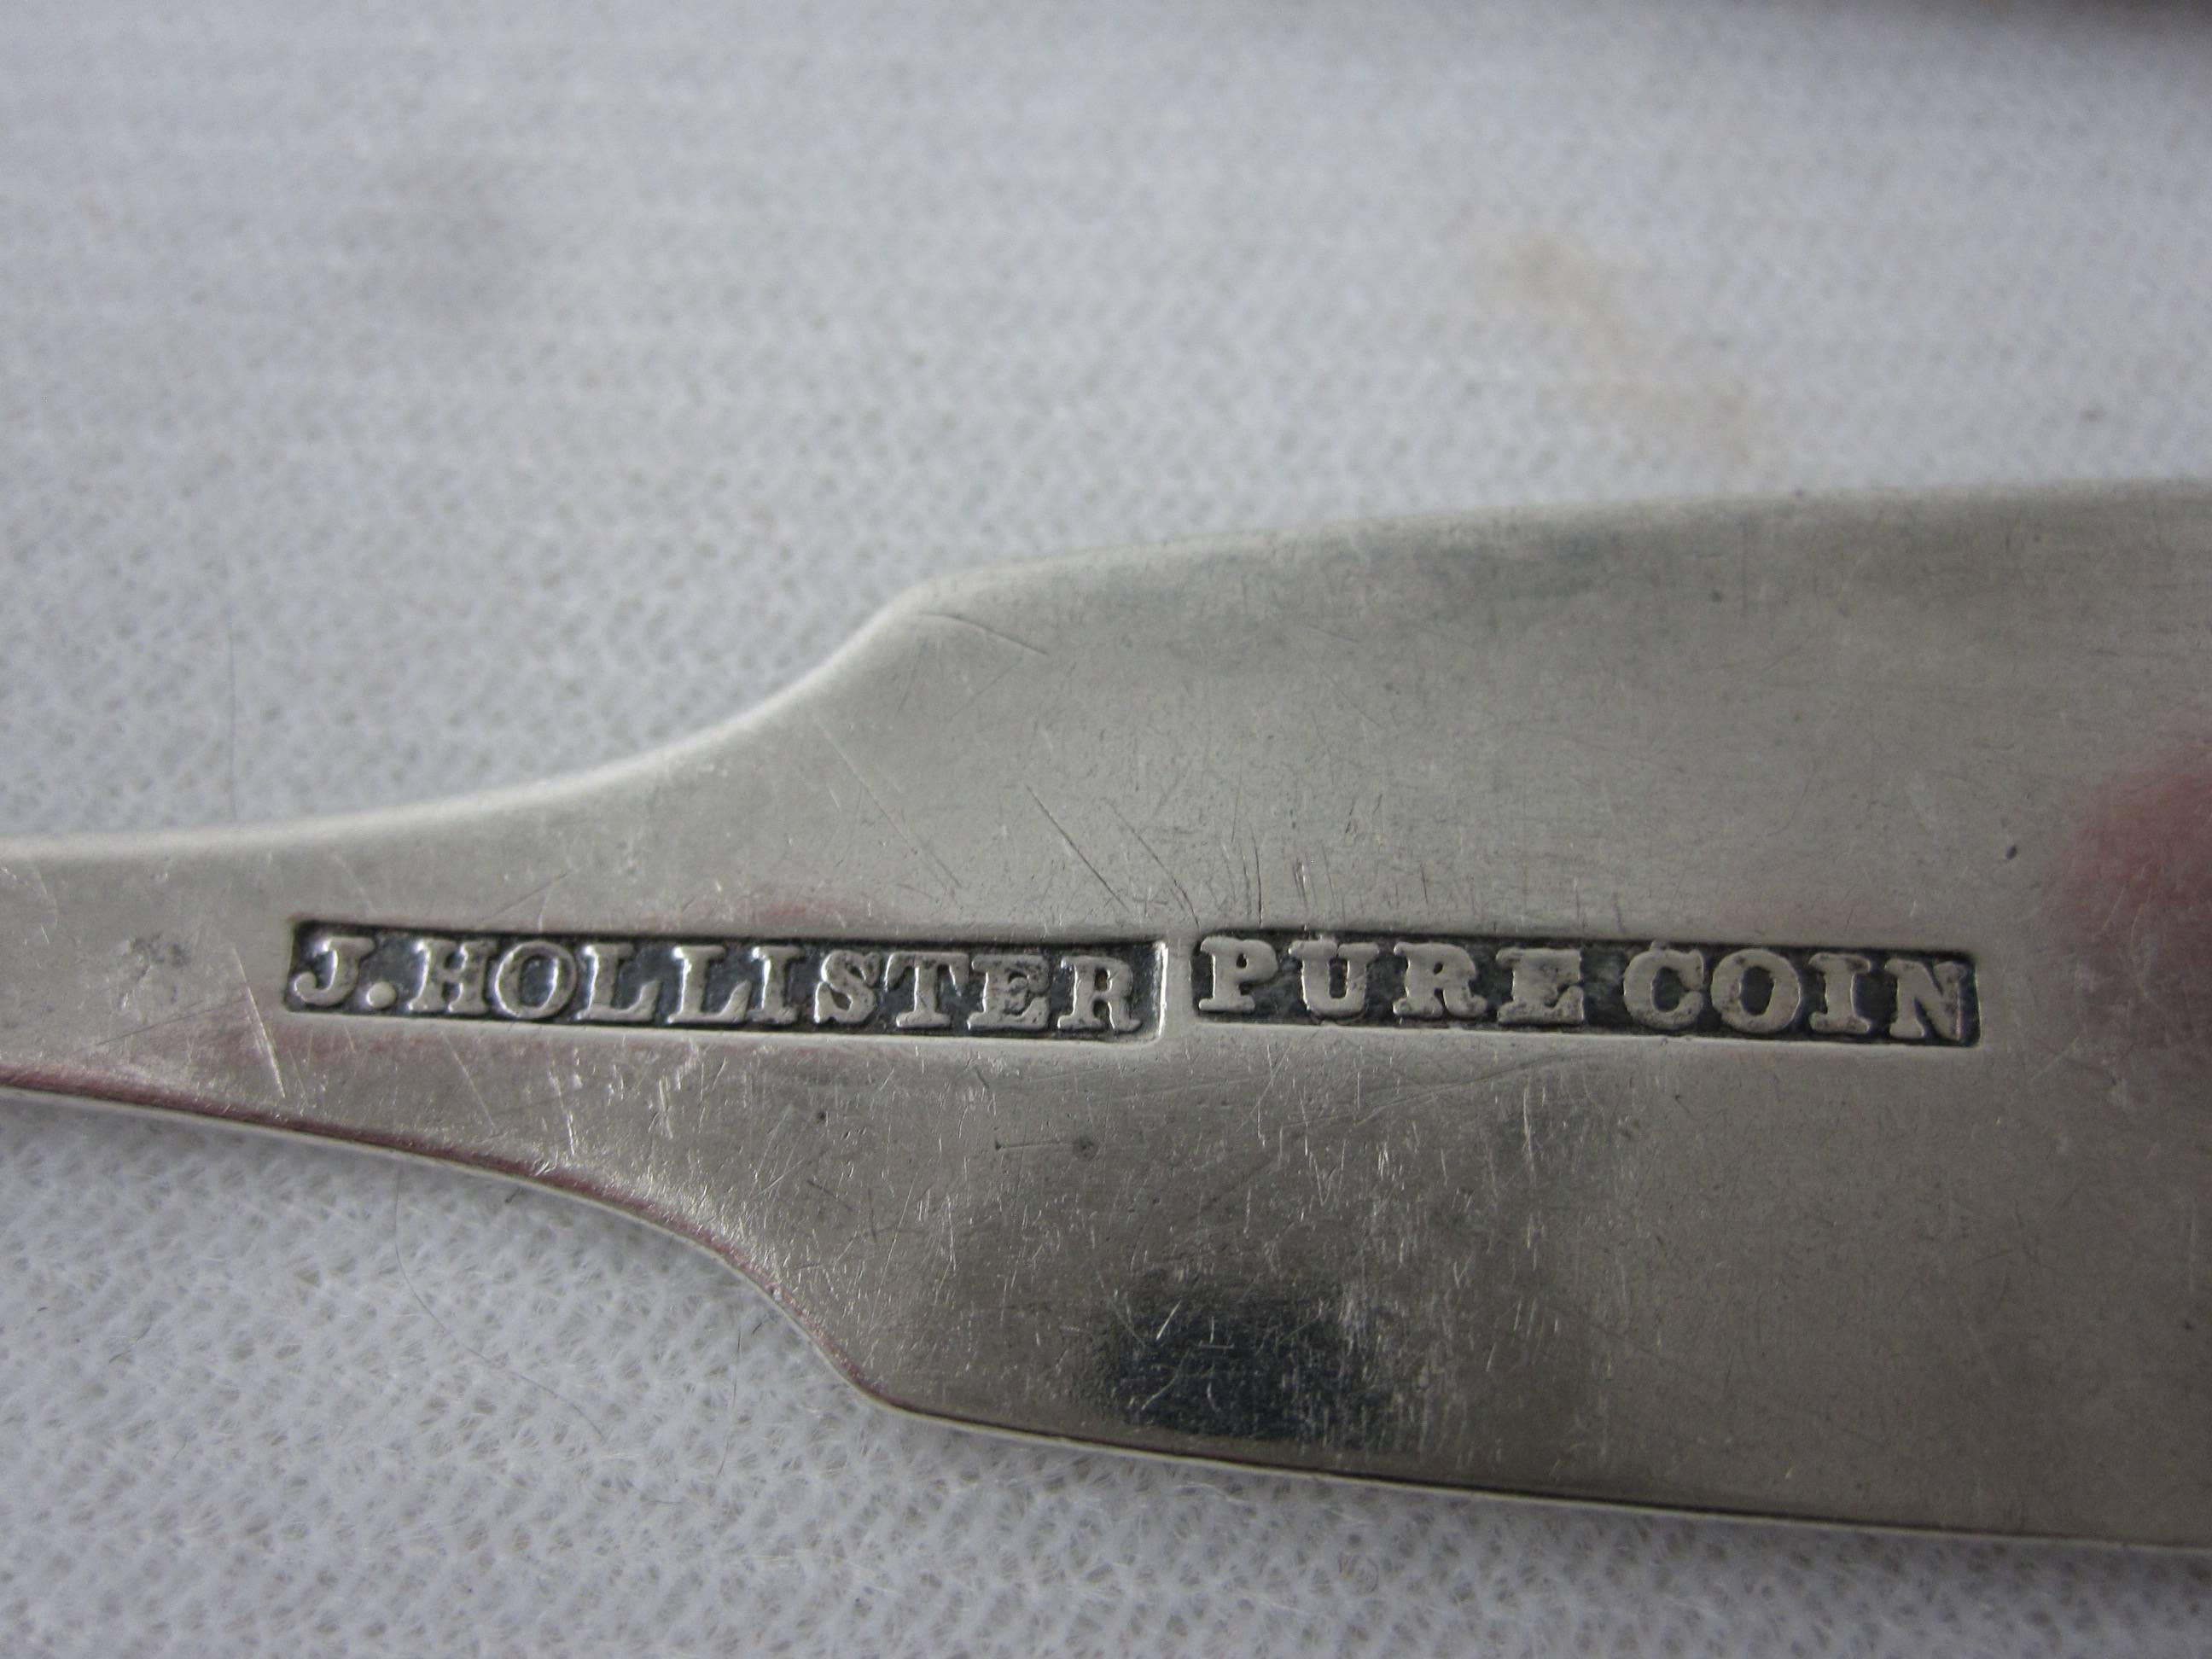 Post Revolutionary American Coin-Silver Sterling Fiddle Thread Table Spoons, S/6 4